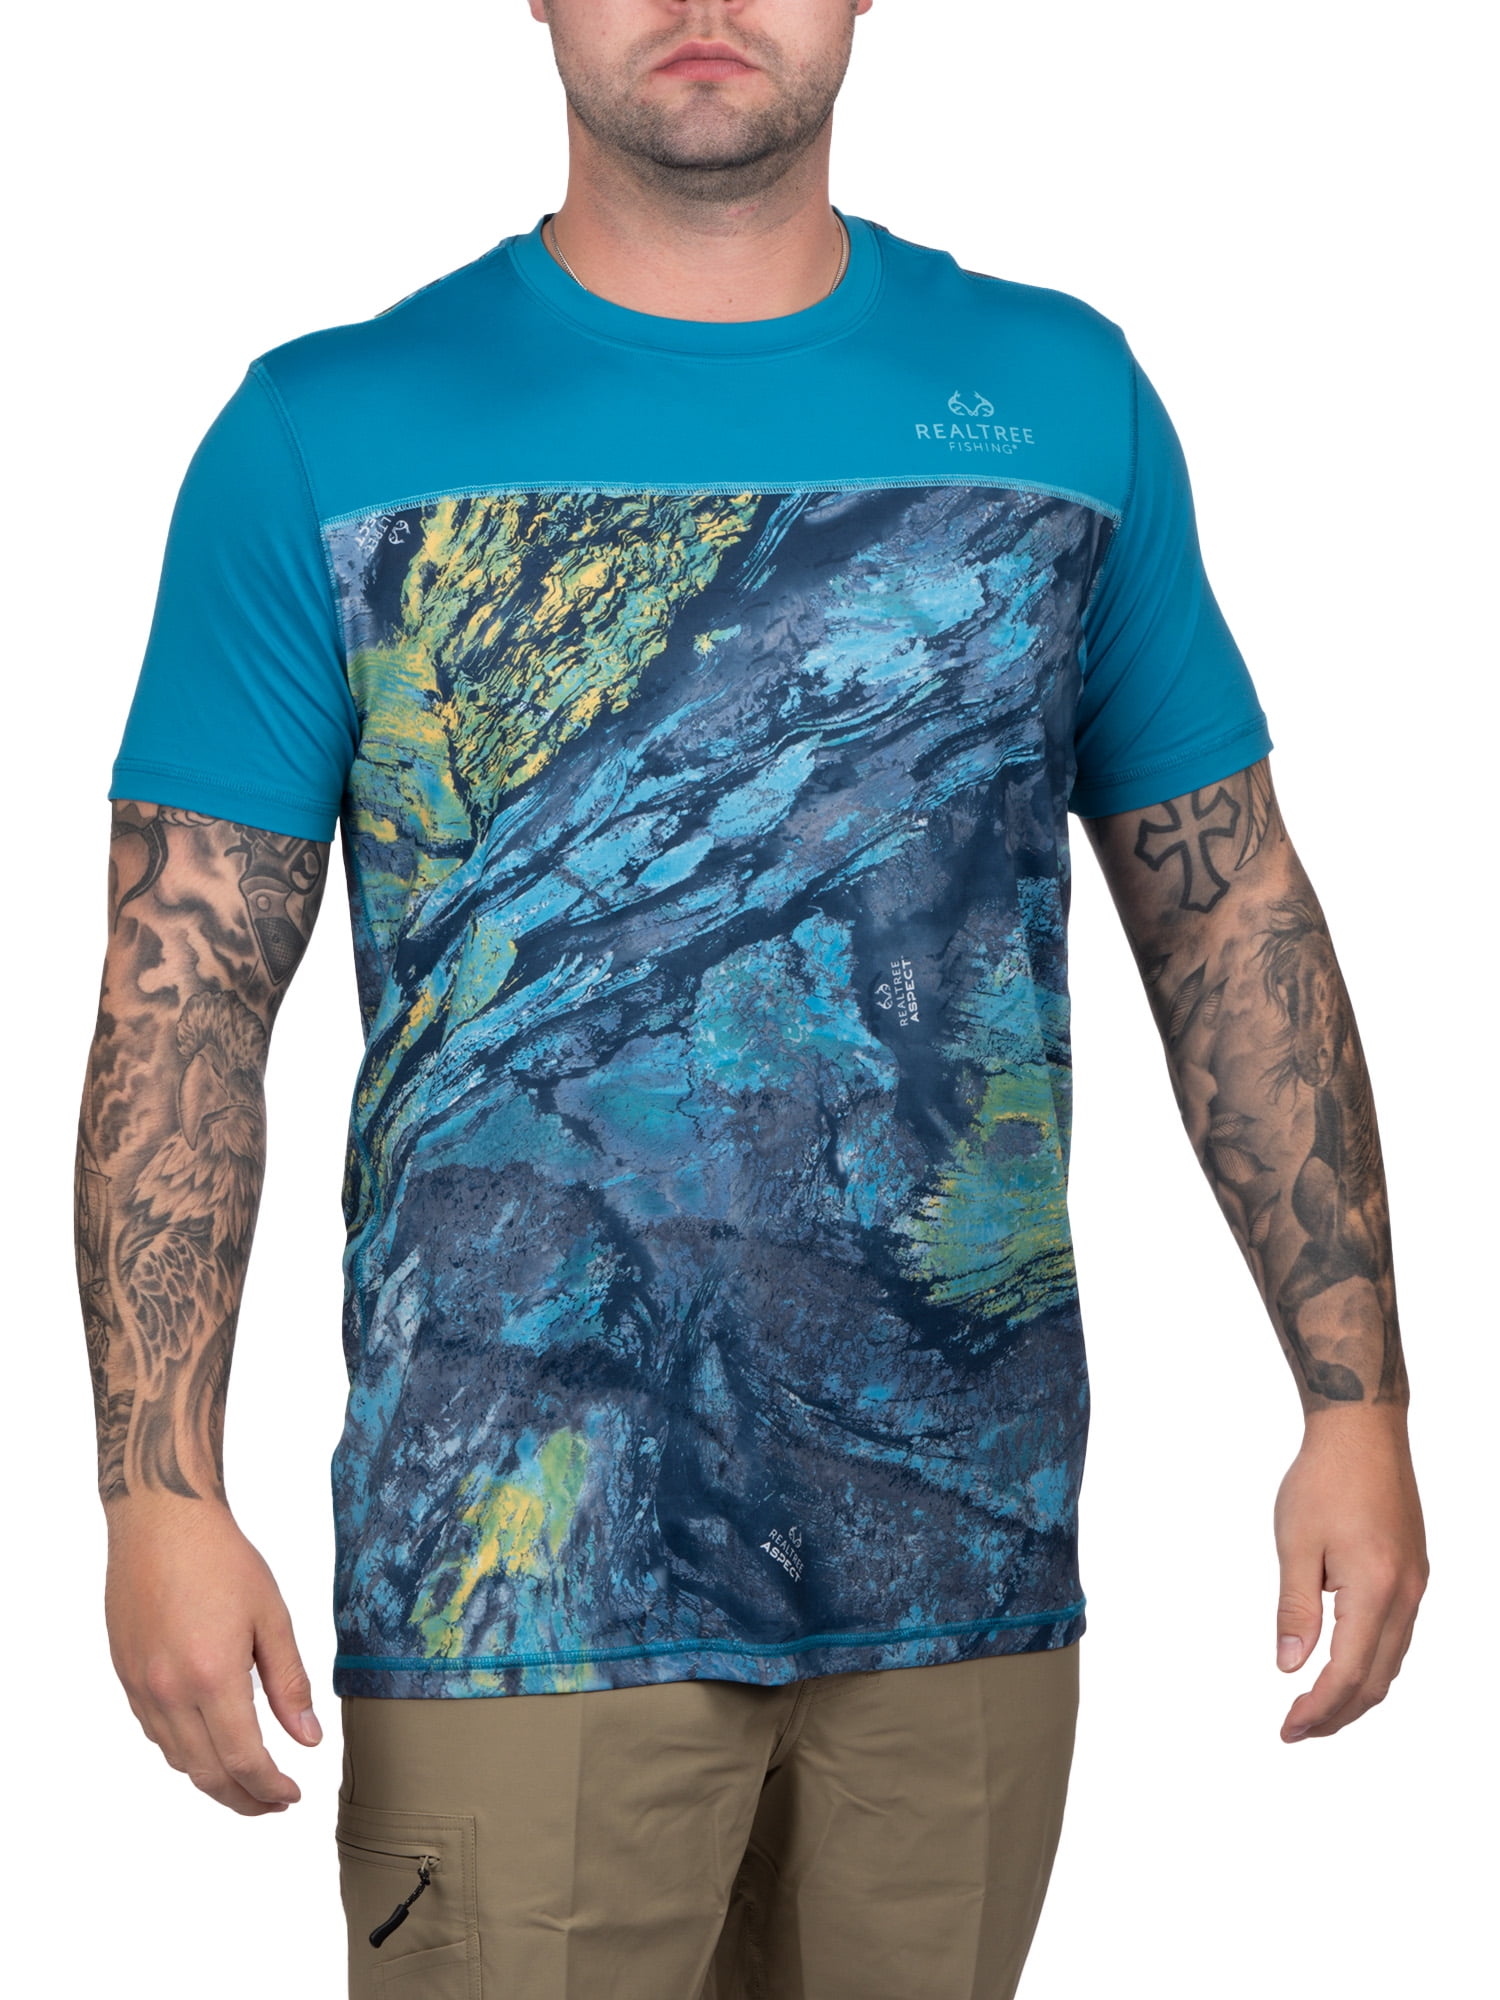 Realtree Mens Short Sleeve Jersey Recycled Polyester UPF Scent Control Sapphire Teal Performance Tee- XL, Men's, Blue